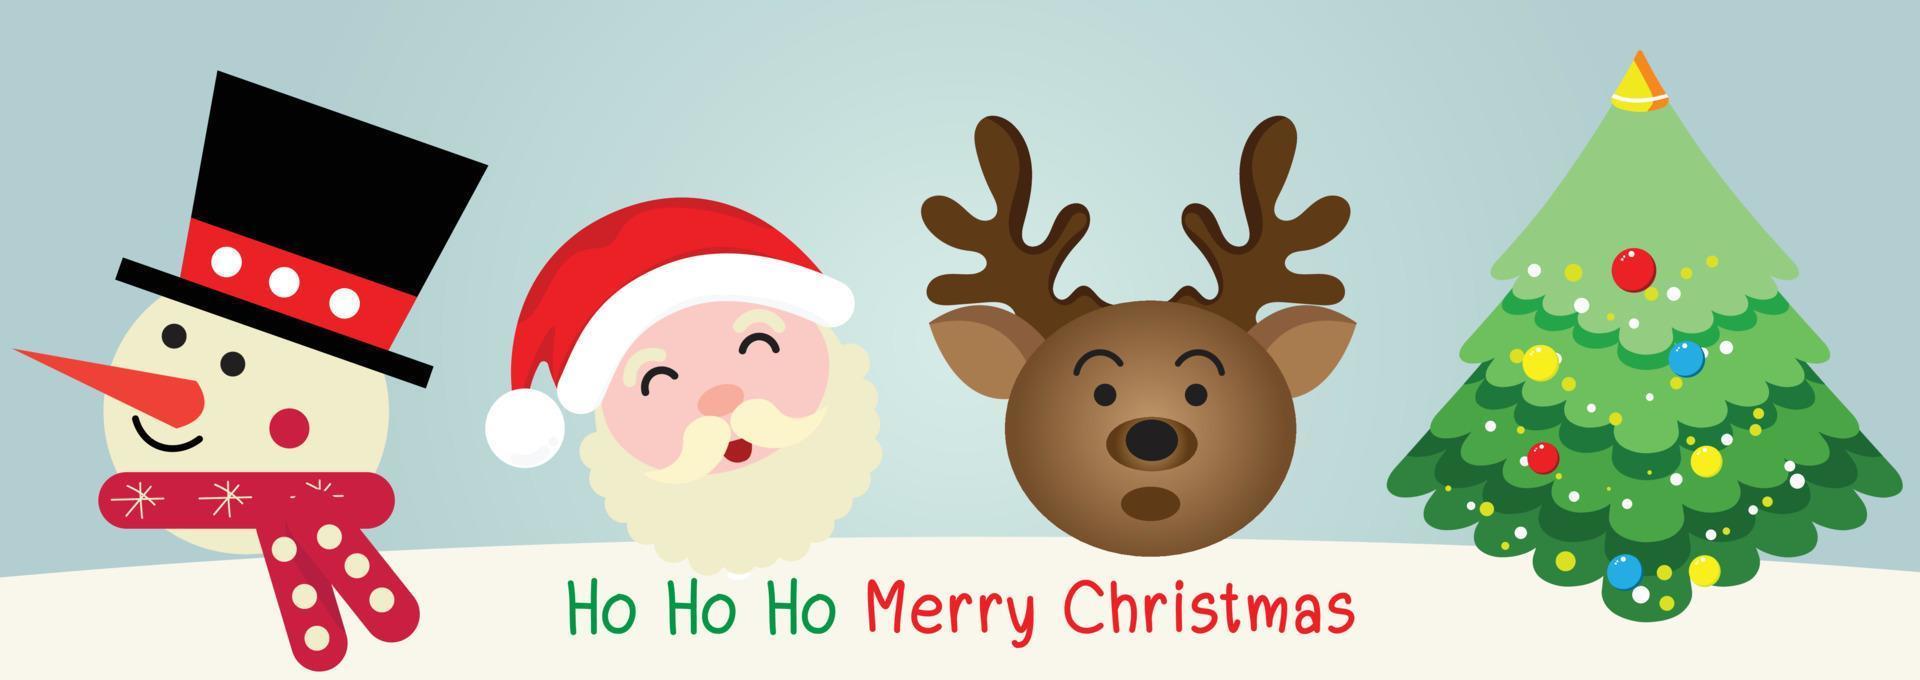 Merry Christmas and happy new year greeting card with cute Santa Claus collection. Holiday cartoon characters set. Vector